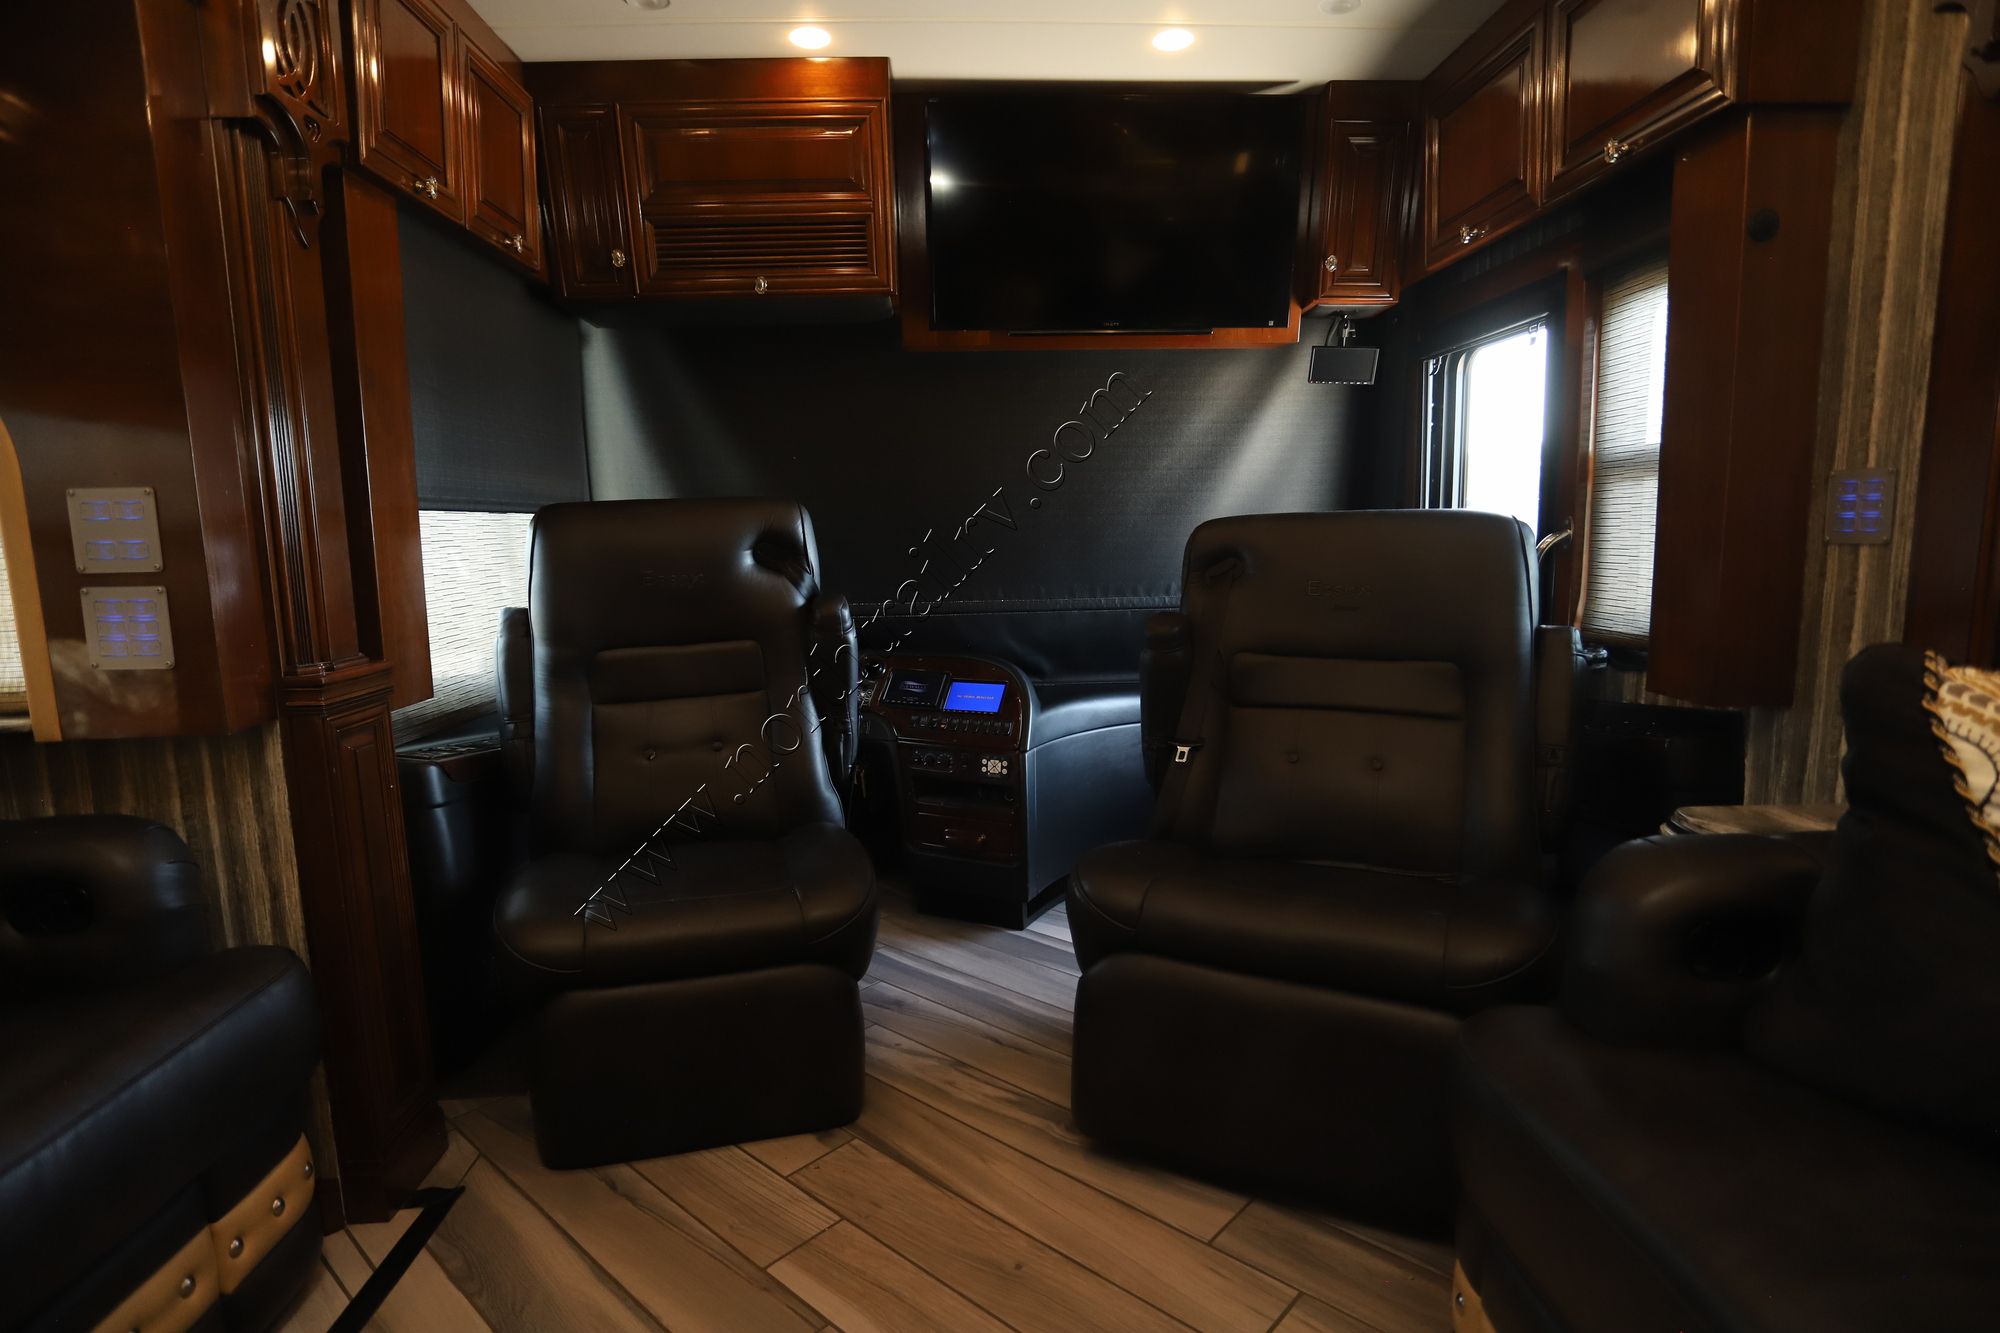 Used 2016 Newmar Essex 4519 Class A  For Sale